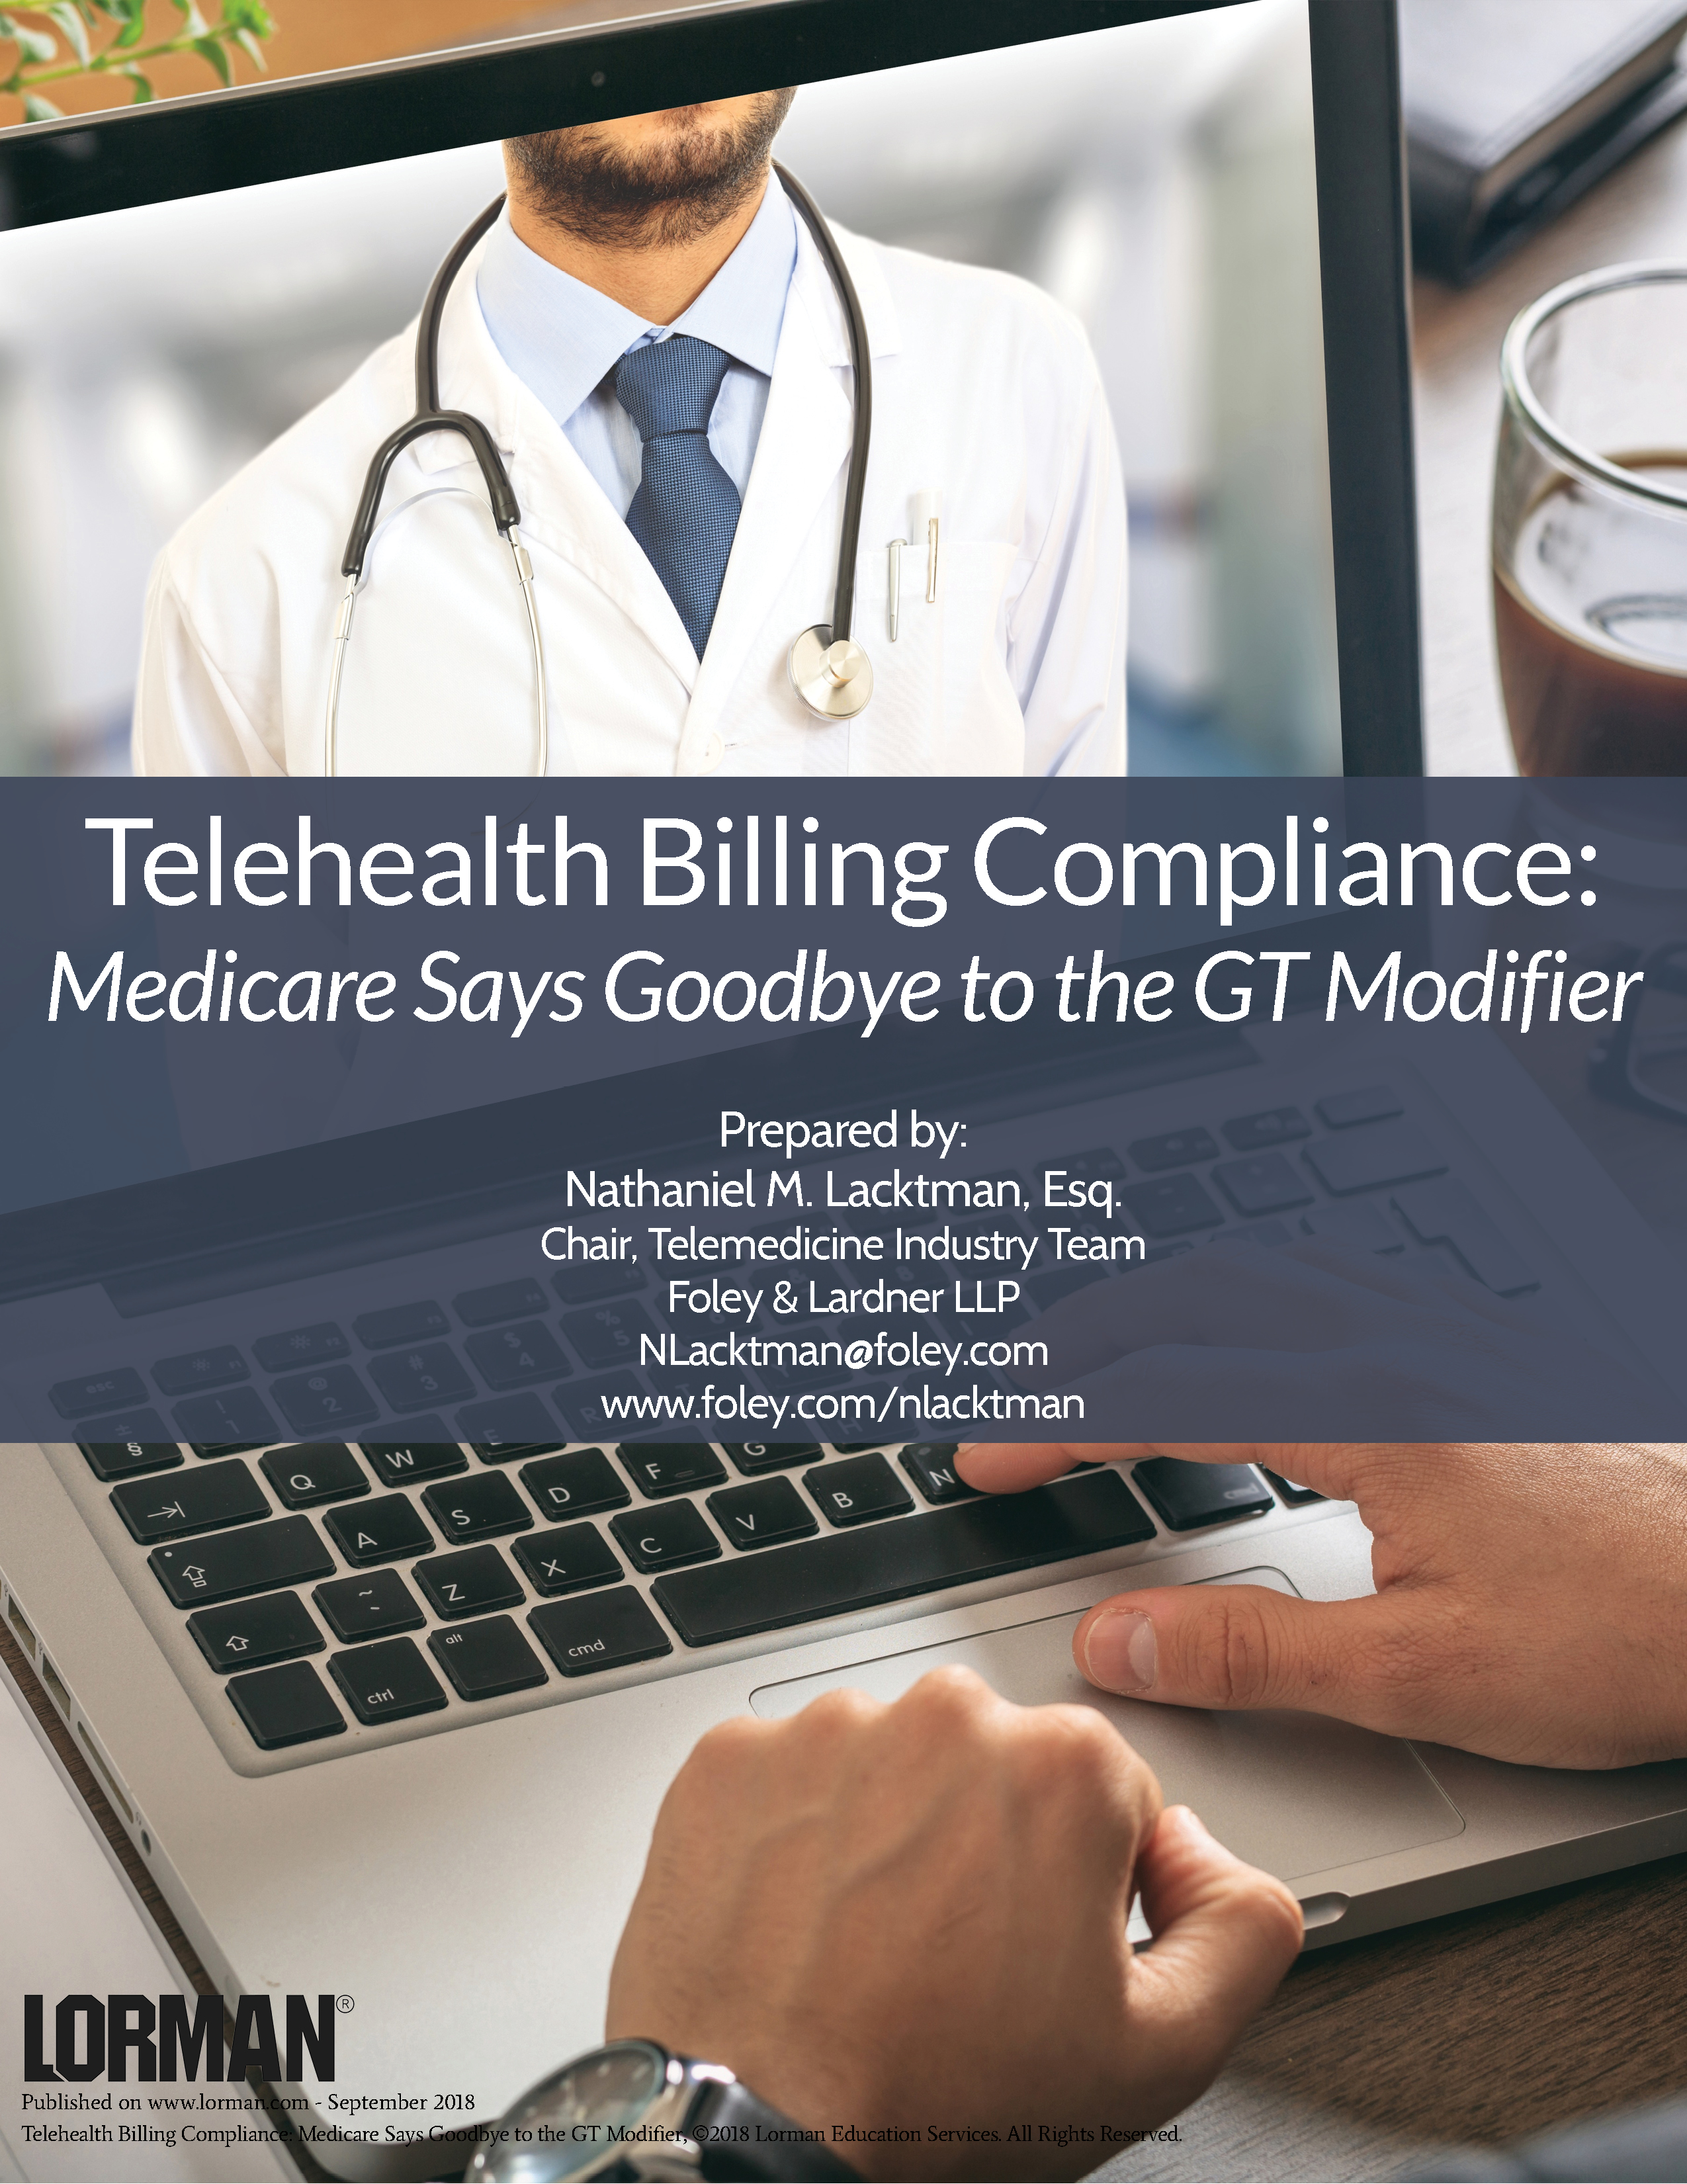 Telehealth Billing Compliance: Medicare Says Goodbye to the GT Modifier